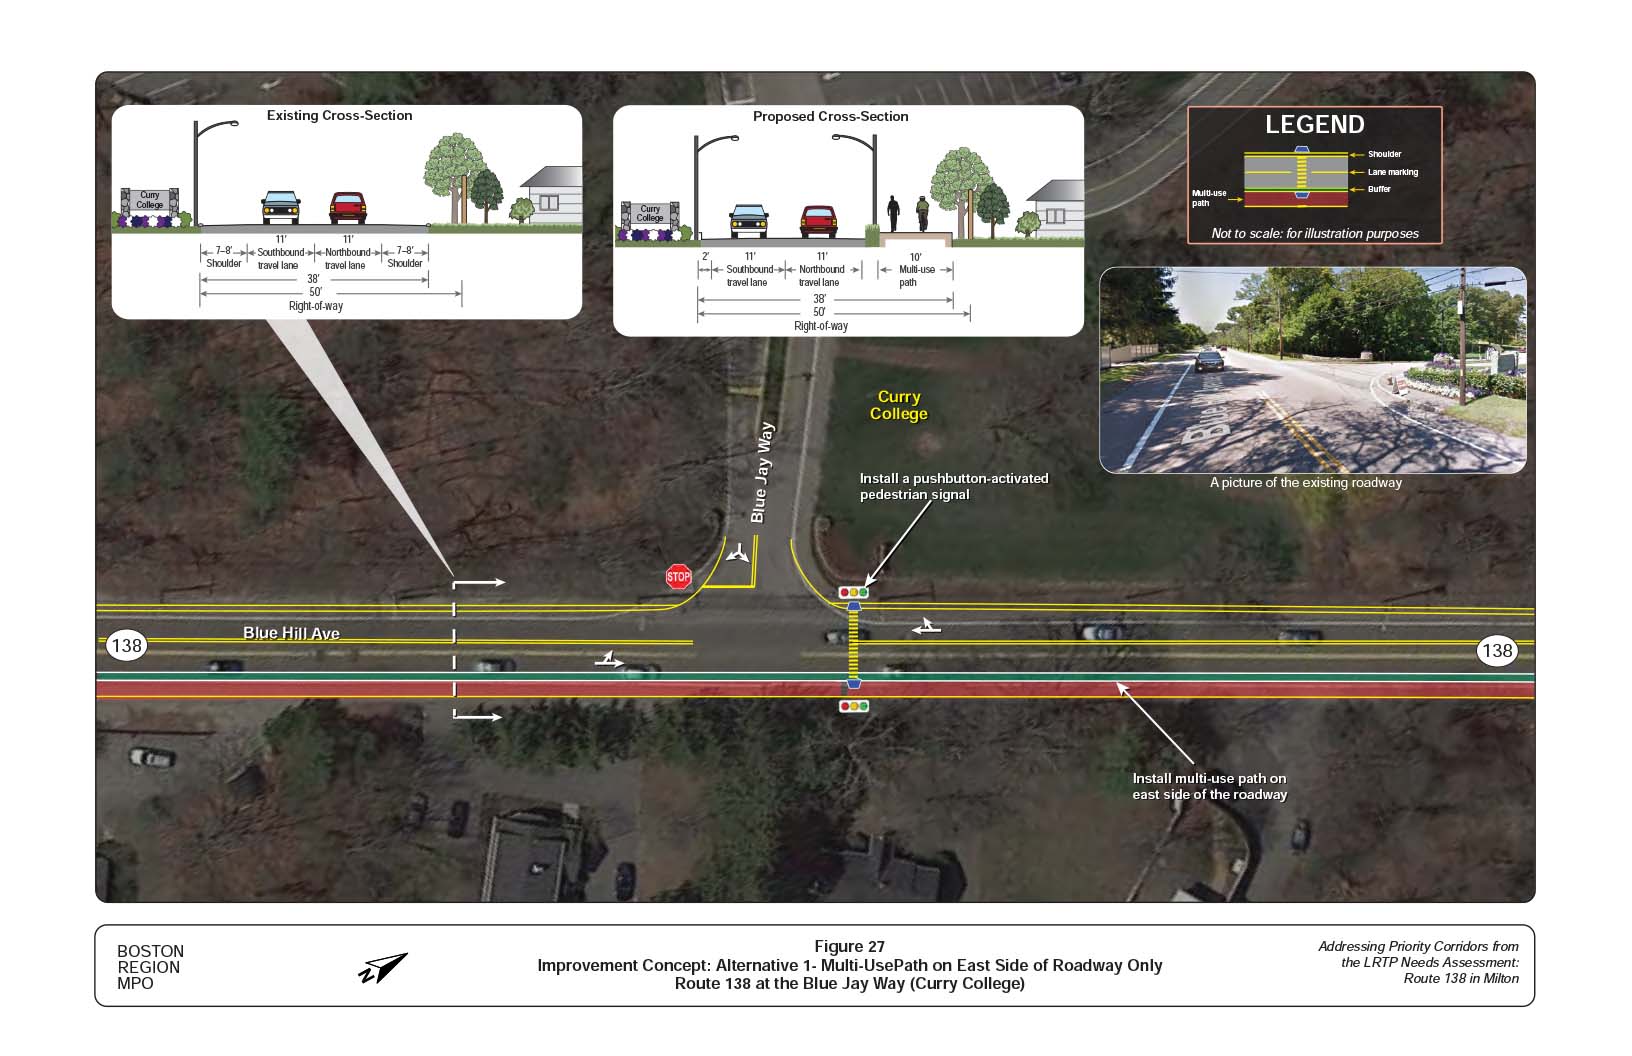 Figure 27 is an aerial photo of Route 138 at Blue Jay Way showing Alternative 1, a multi-use path on the east side of the roadway, and overlays showing the existing and proposed cross-sections.